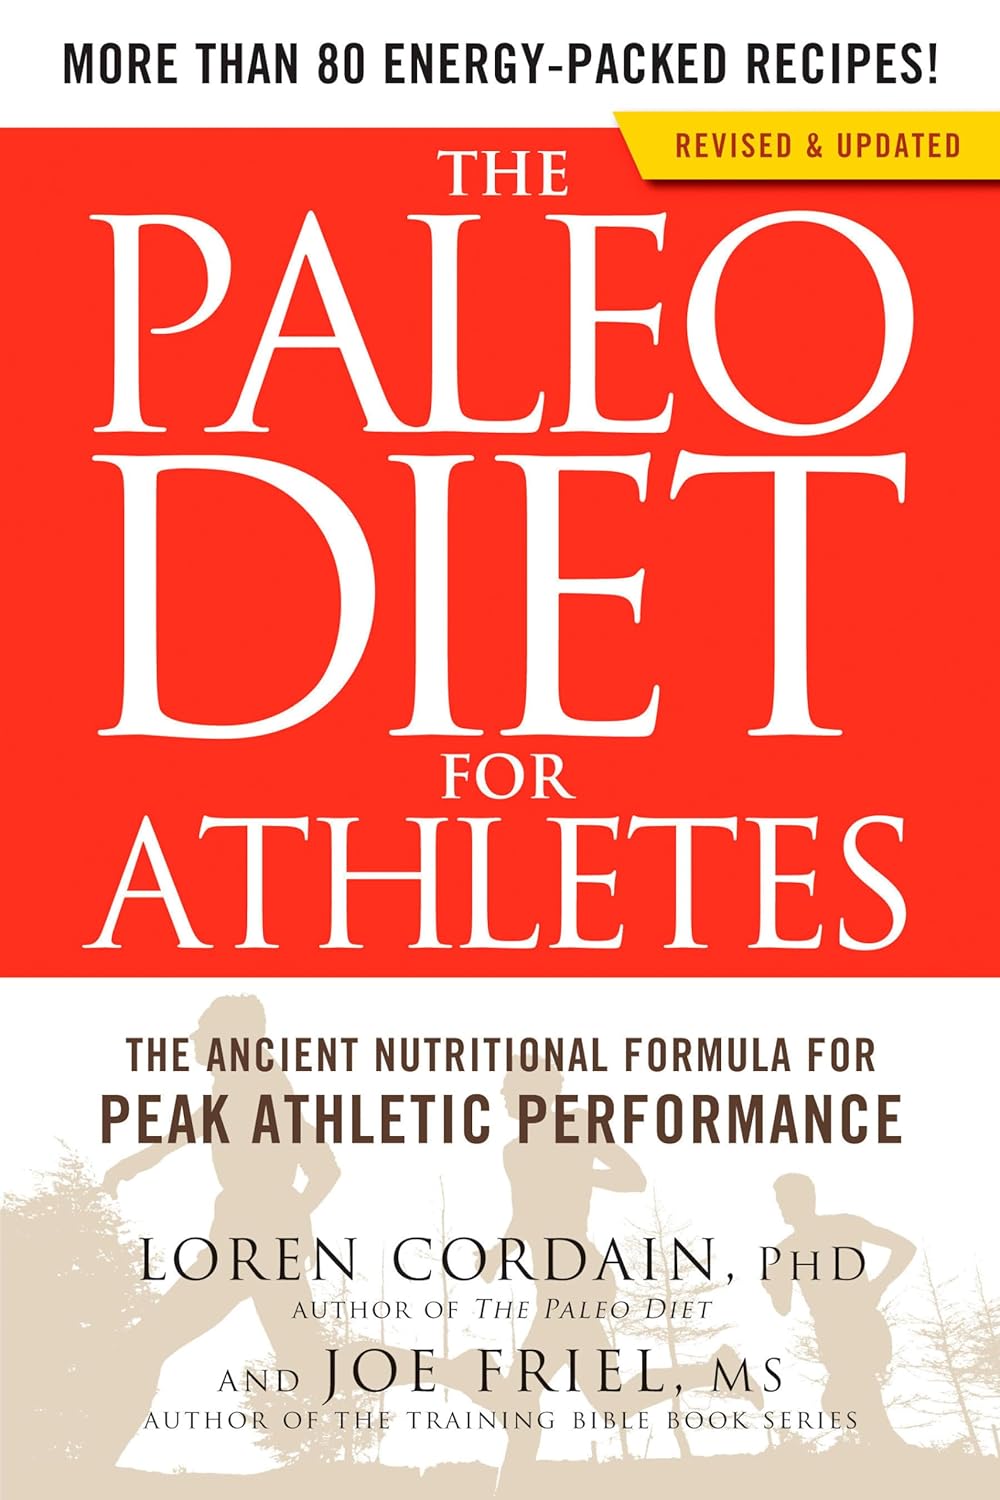 Featured Image for The Paleo Diet for Athletes: The Ancient Nutritional Formula for Peak Athletic Performance